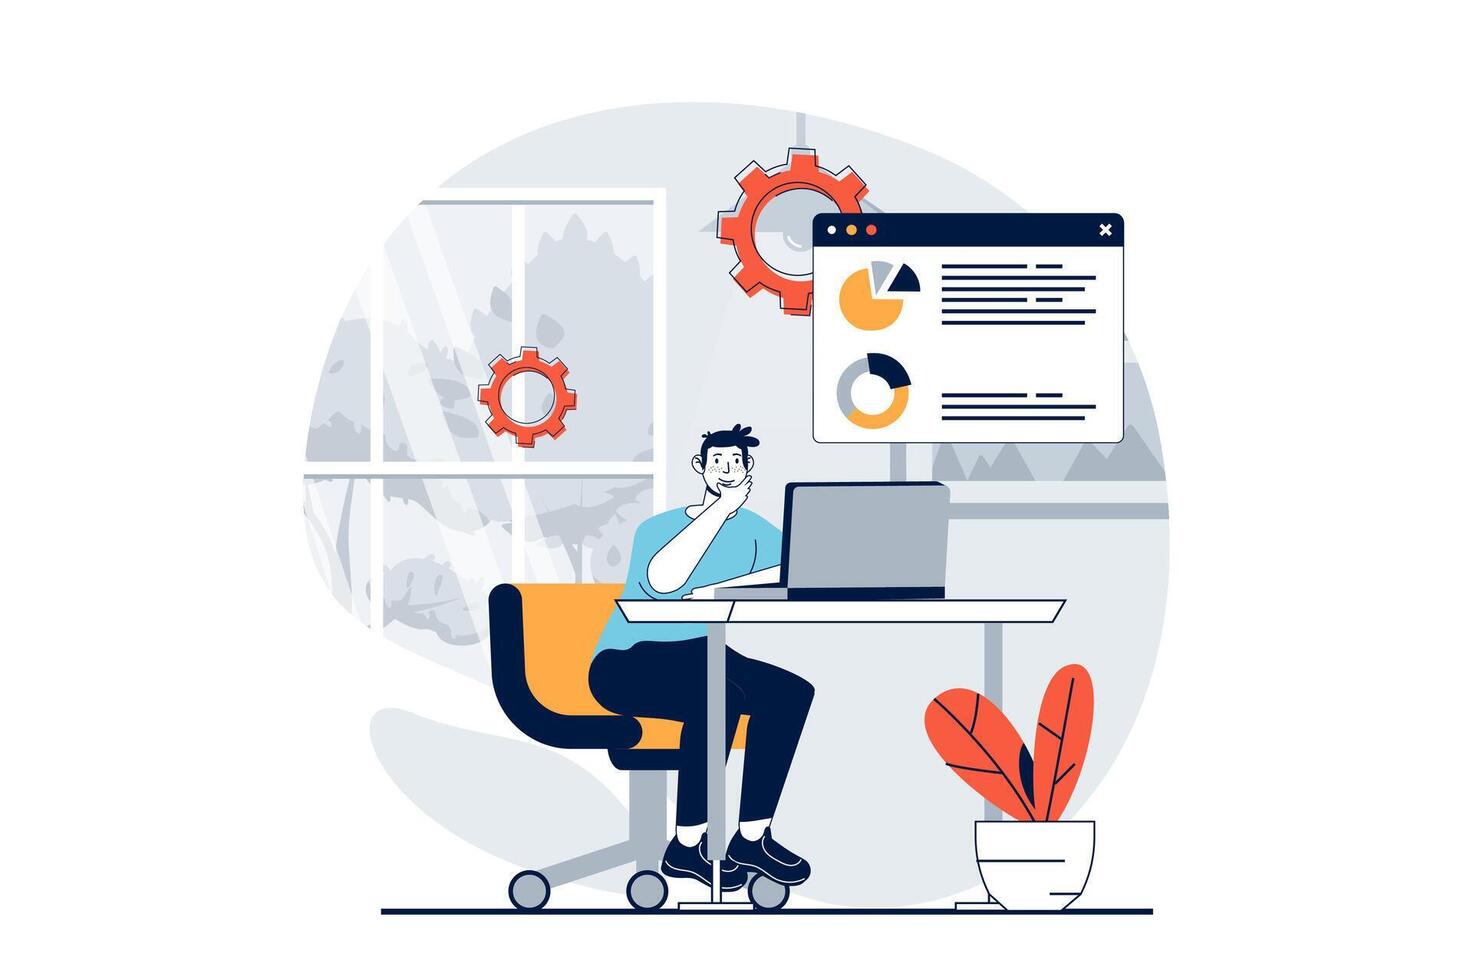 Data science concept with people scene in flat design for web. Man researching diagram analytics, making financial audit for forecast. Vector illustration for social media banner, marketing material.